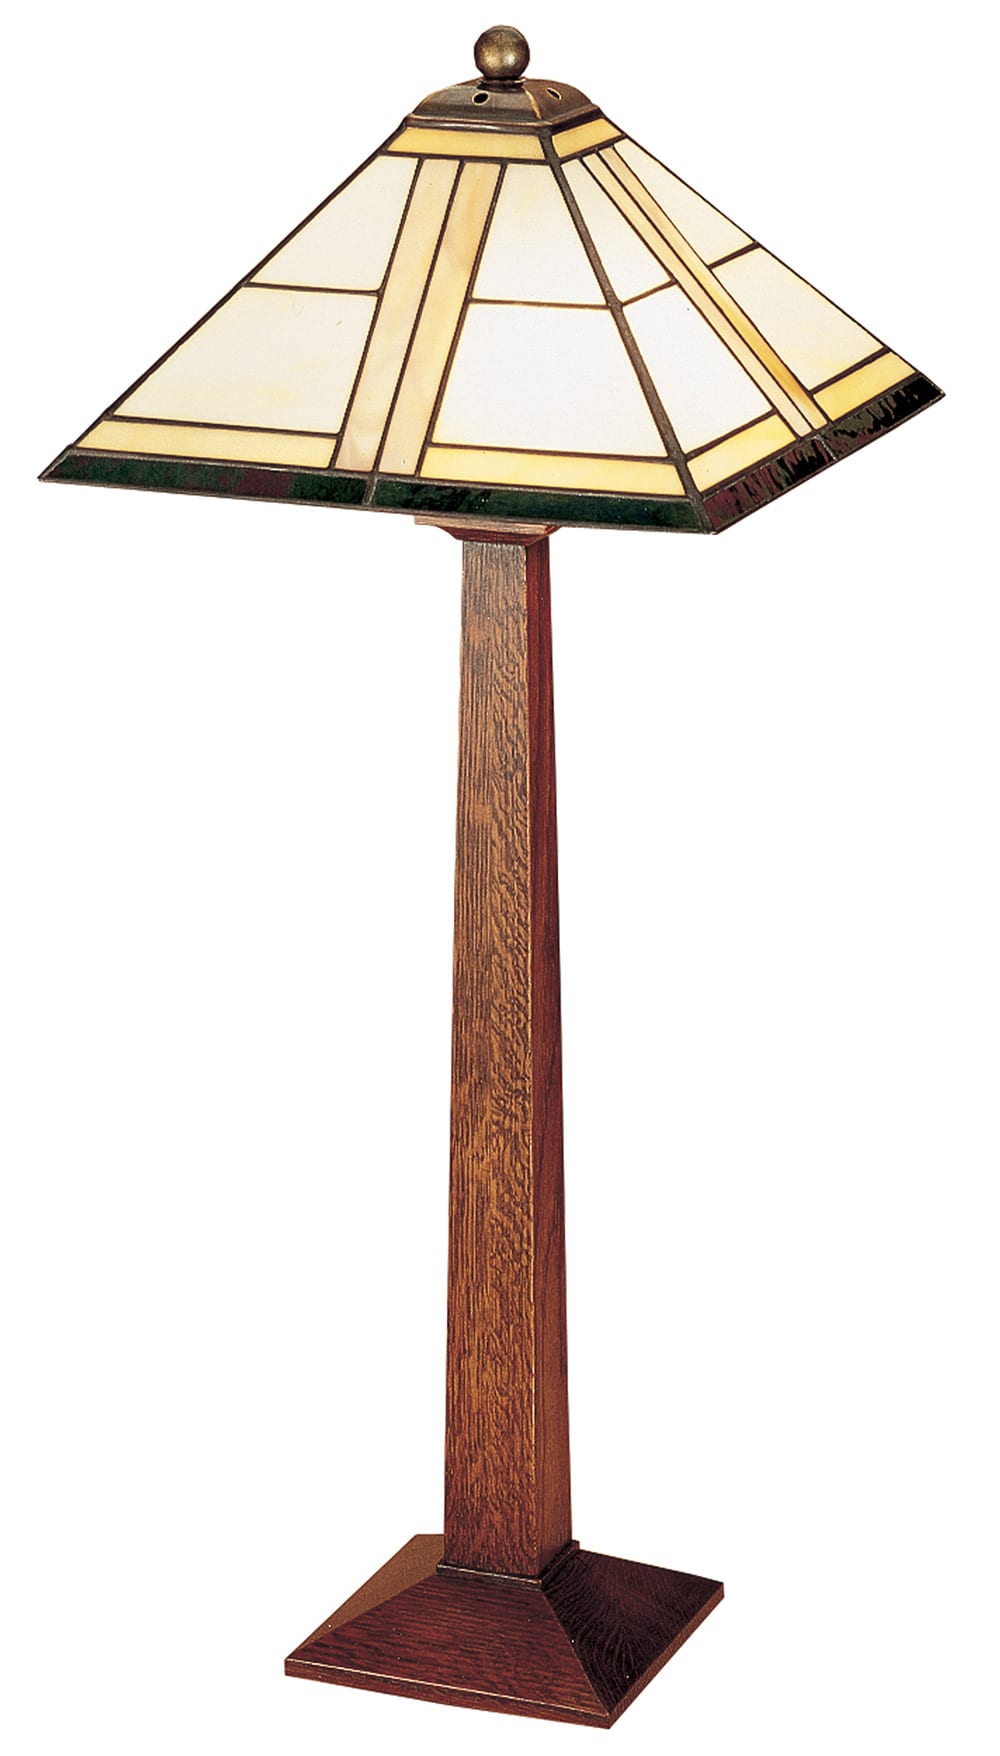 Square Base Table Lamp with Art Glass Shade - Stickley Brand